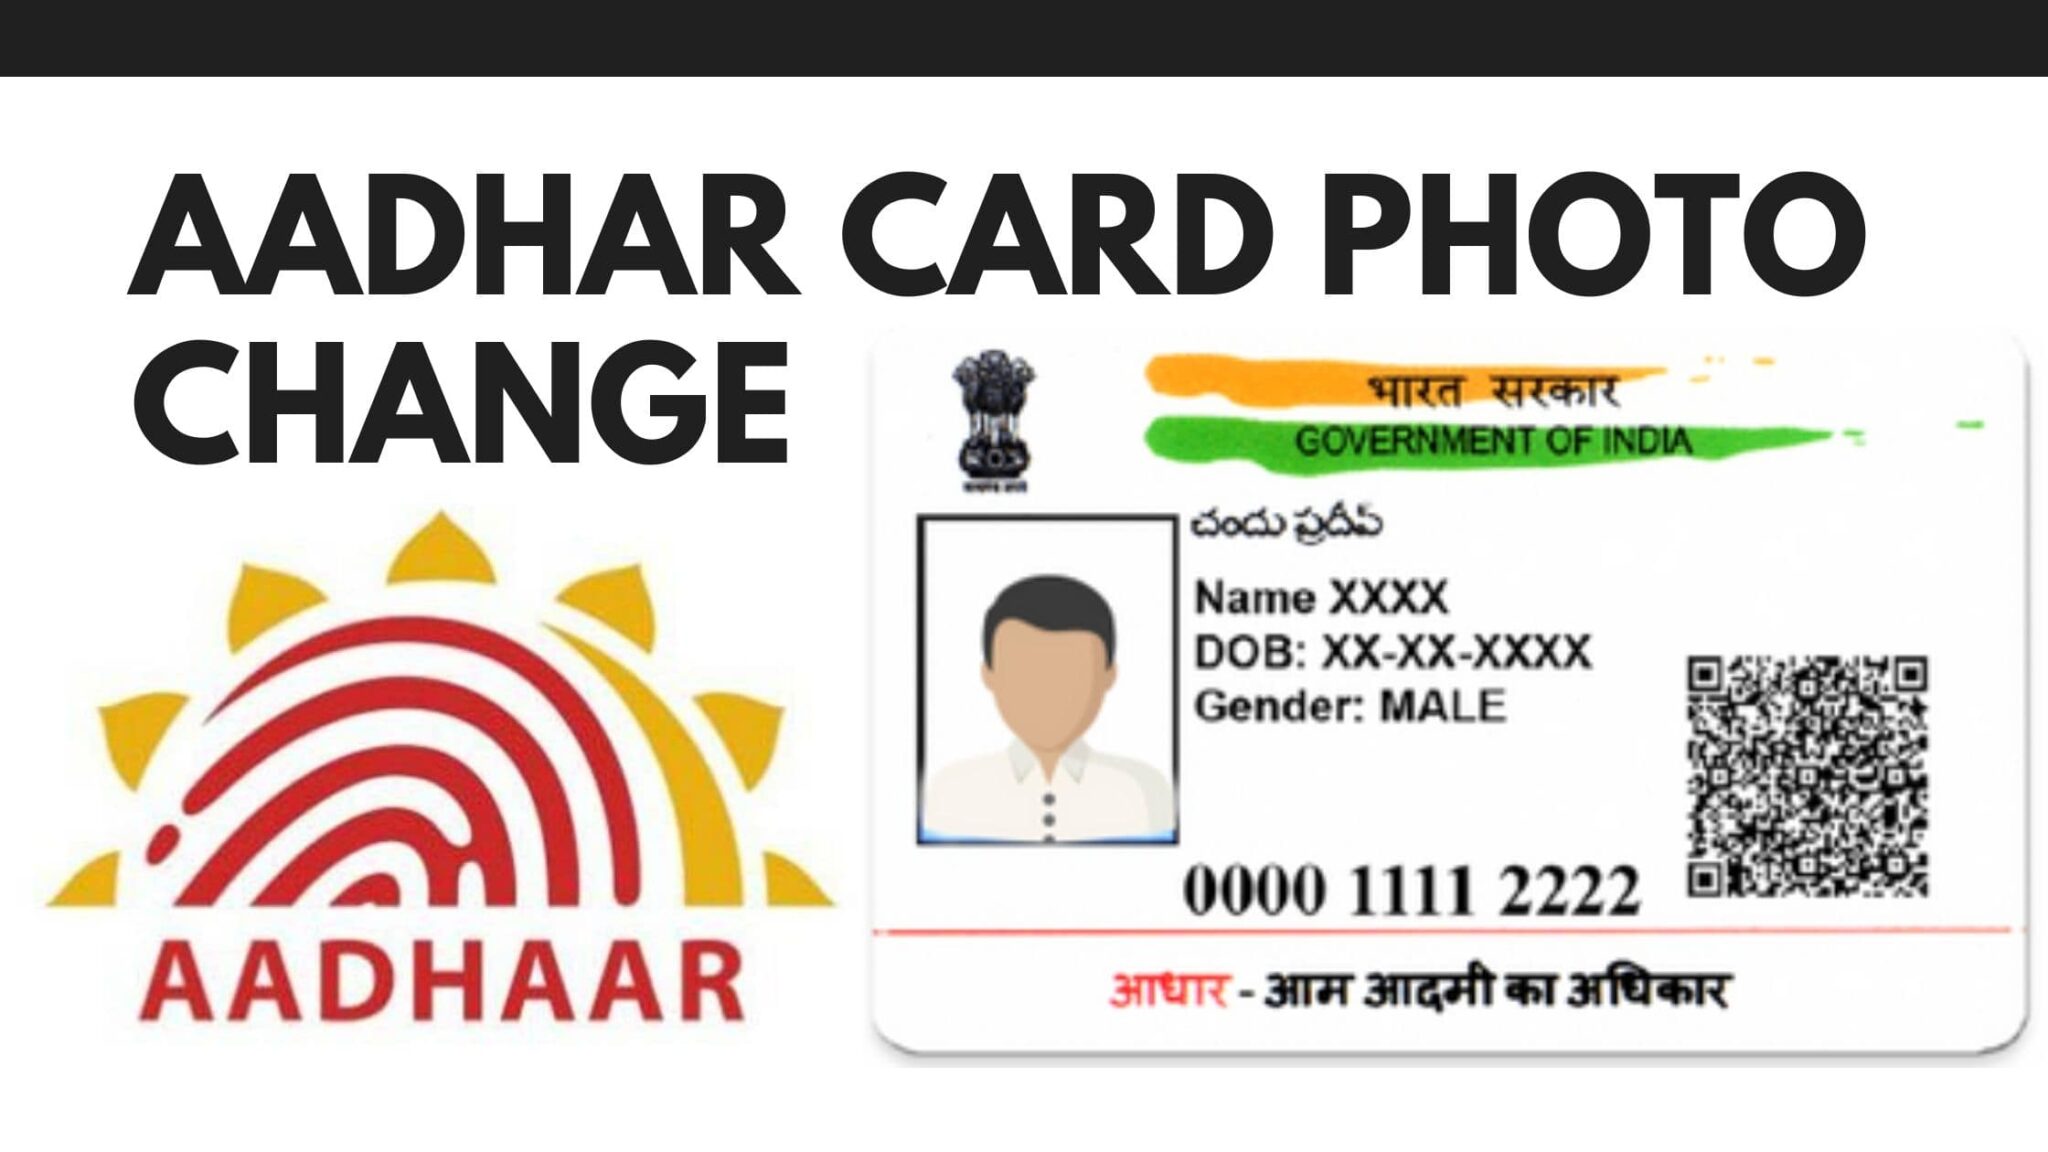 how to change picture in aadhar card online